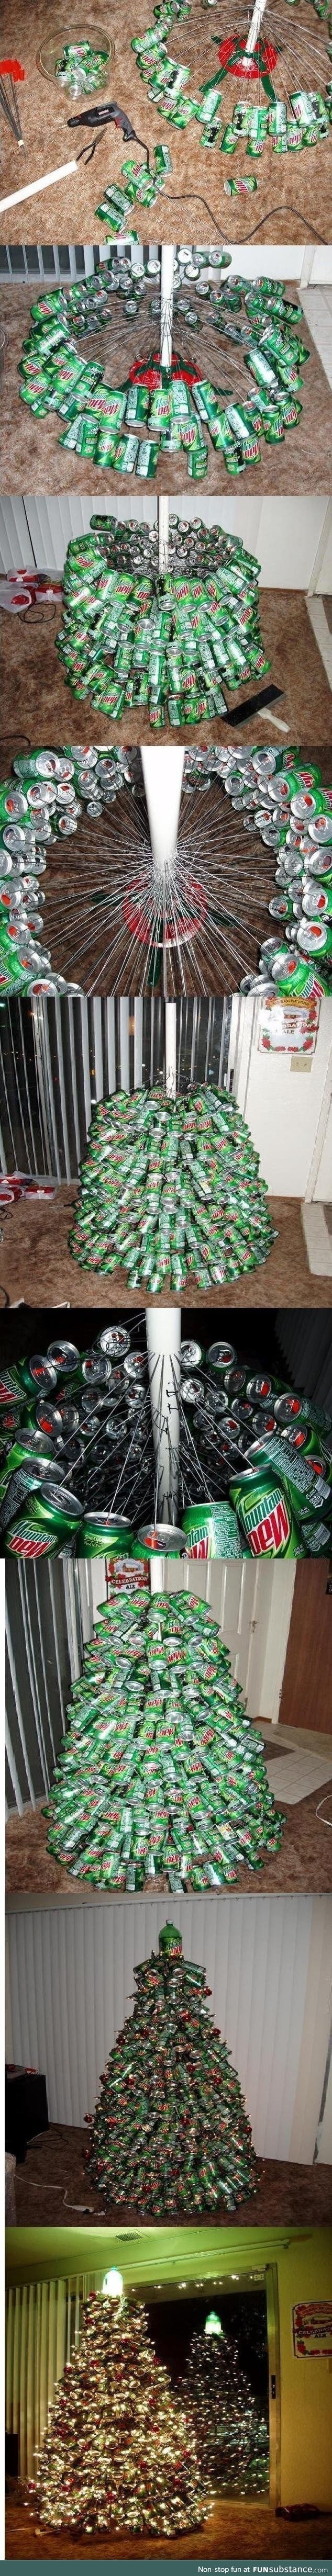 Christmas tree from cans